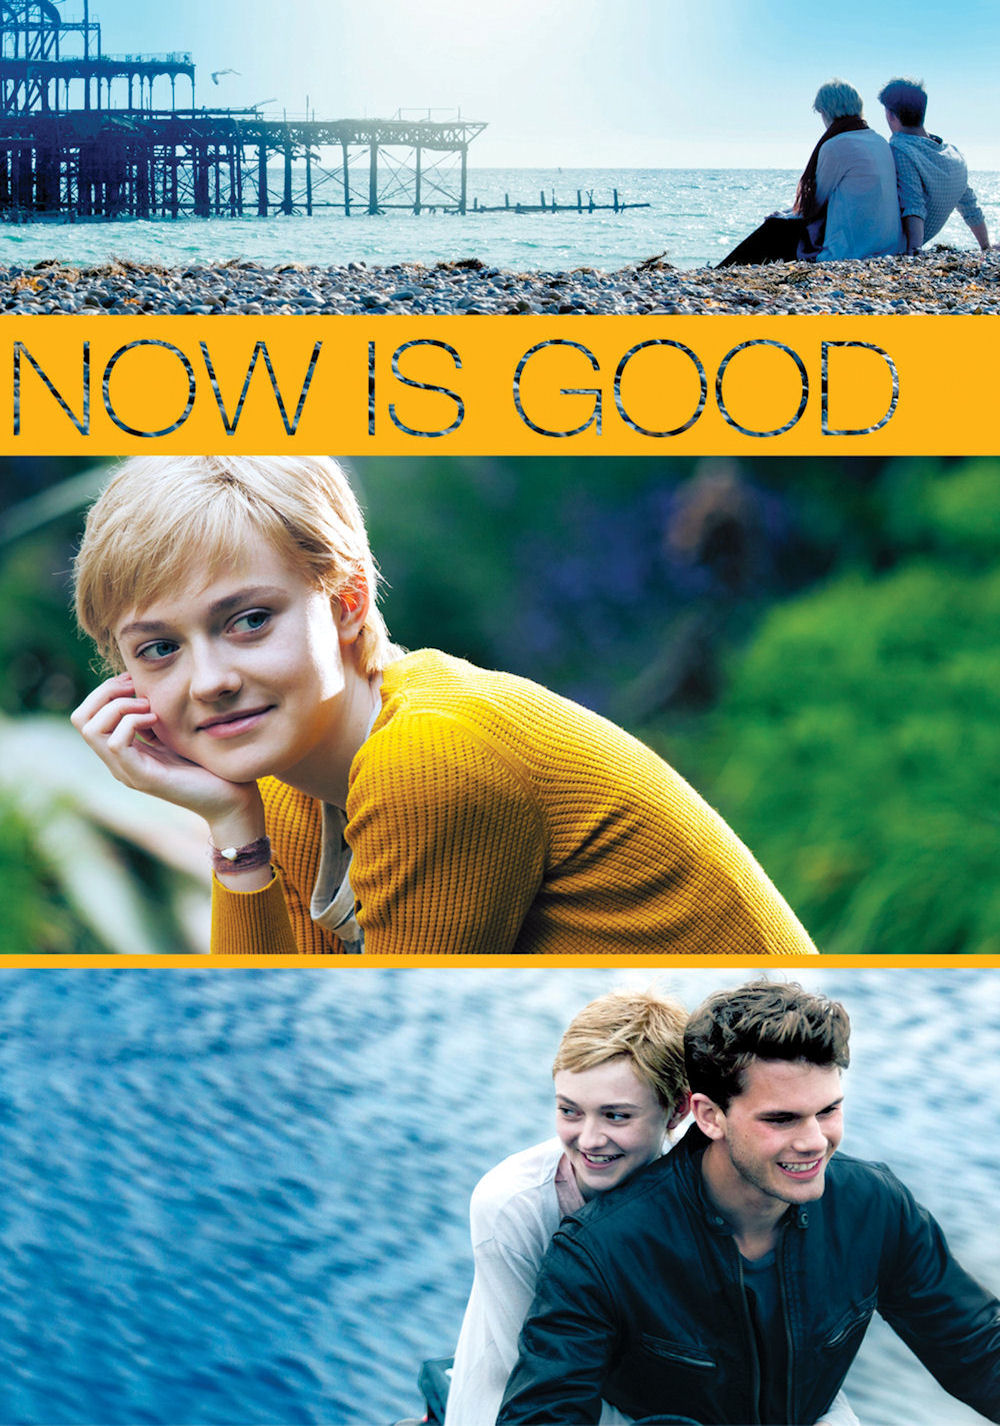 Poster Now is good - Jeder Moment zählt